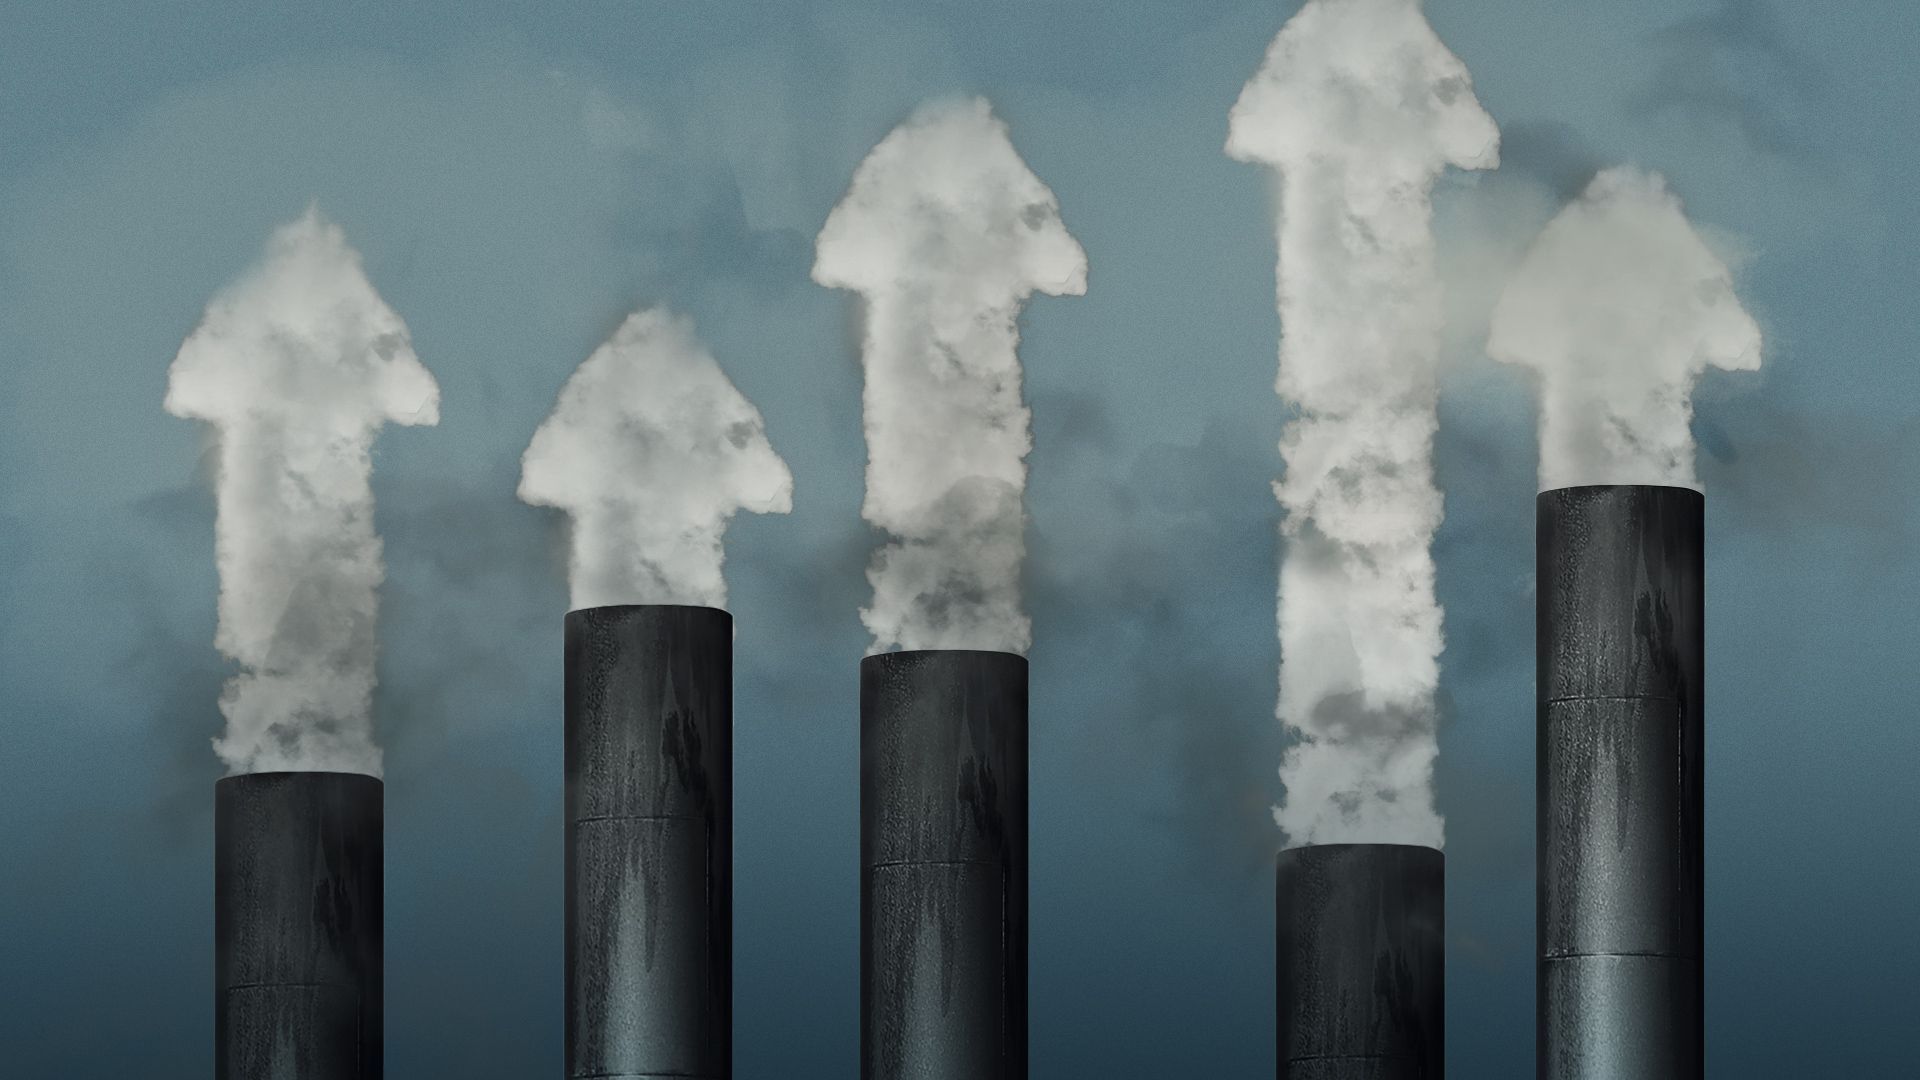 Illustration of smoke stacks with fumes in the shape of upward arrows.